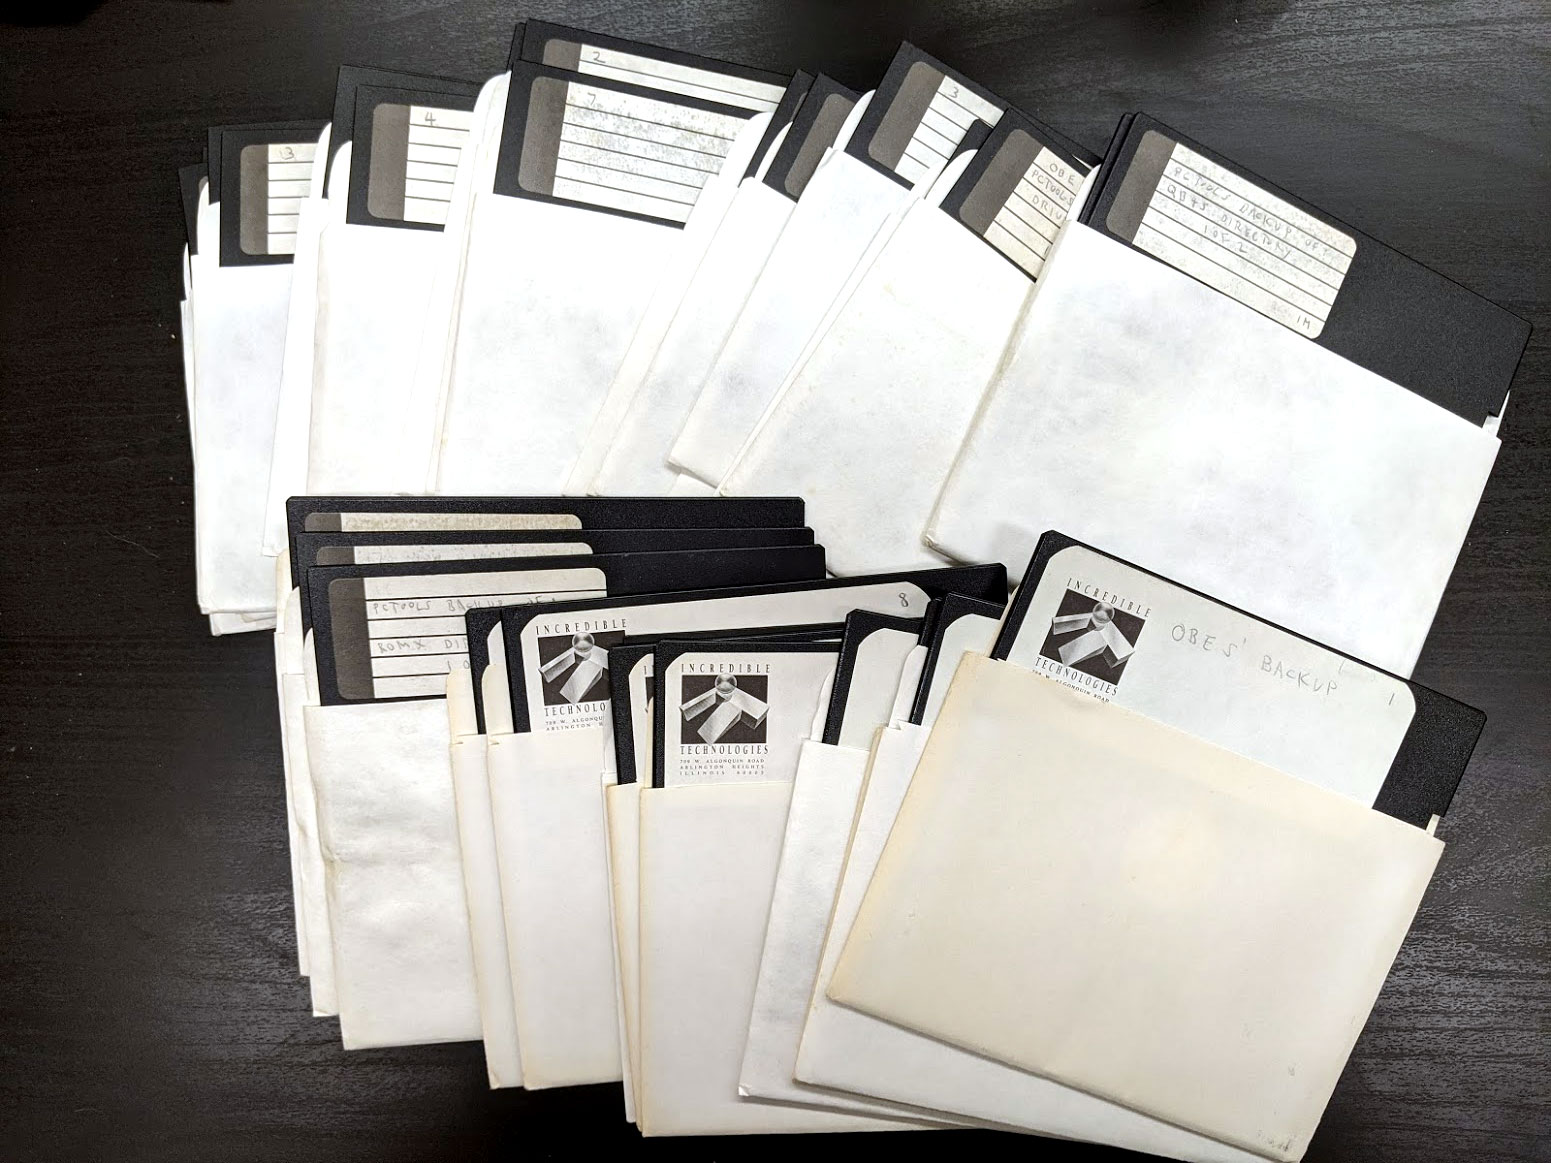 A pile of white-paper wrapped floppy disks